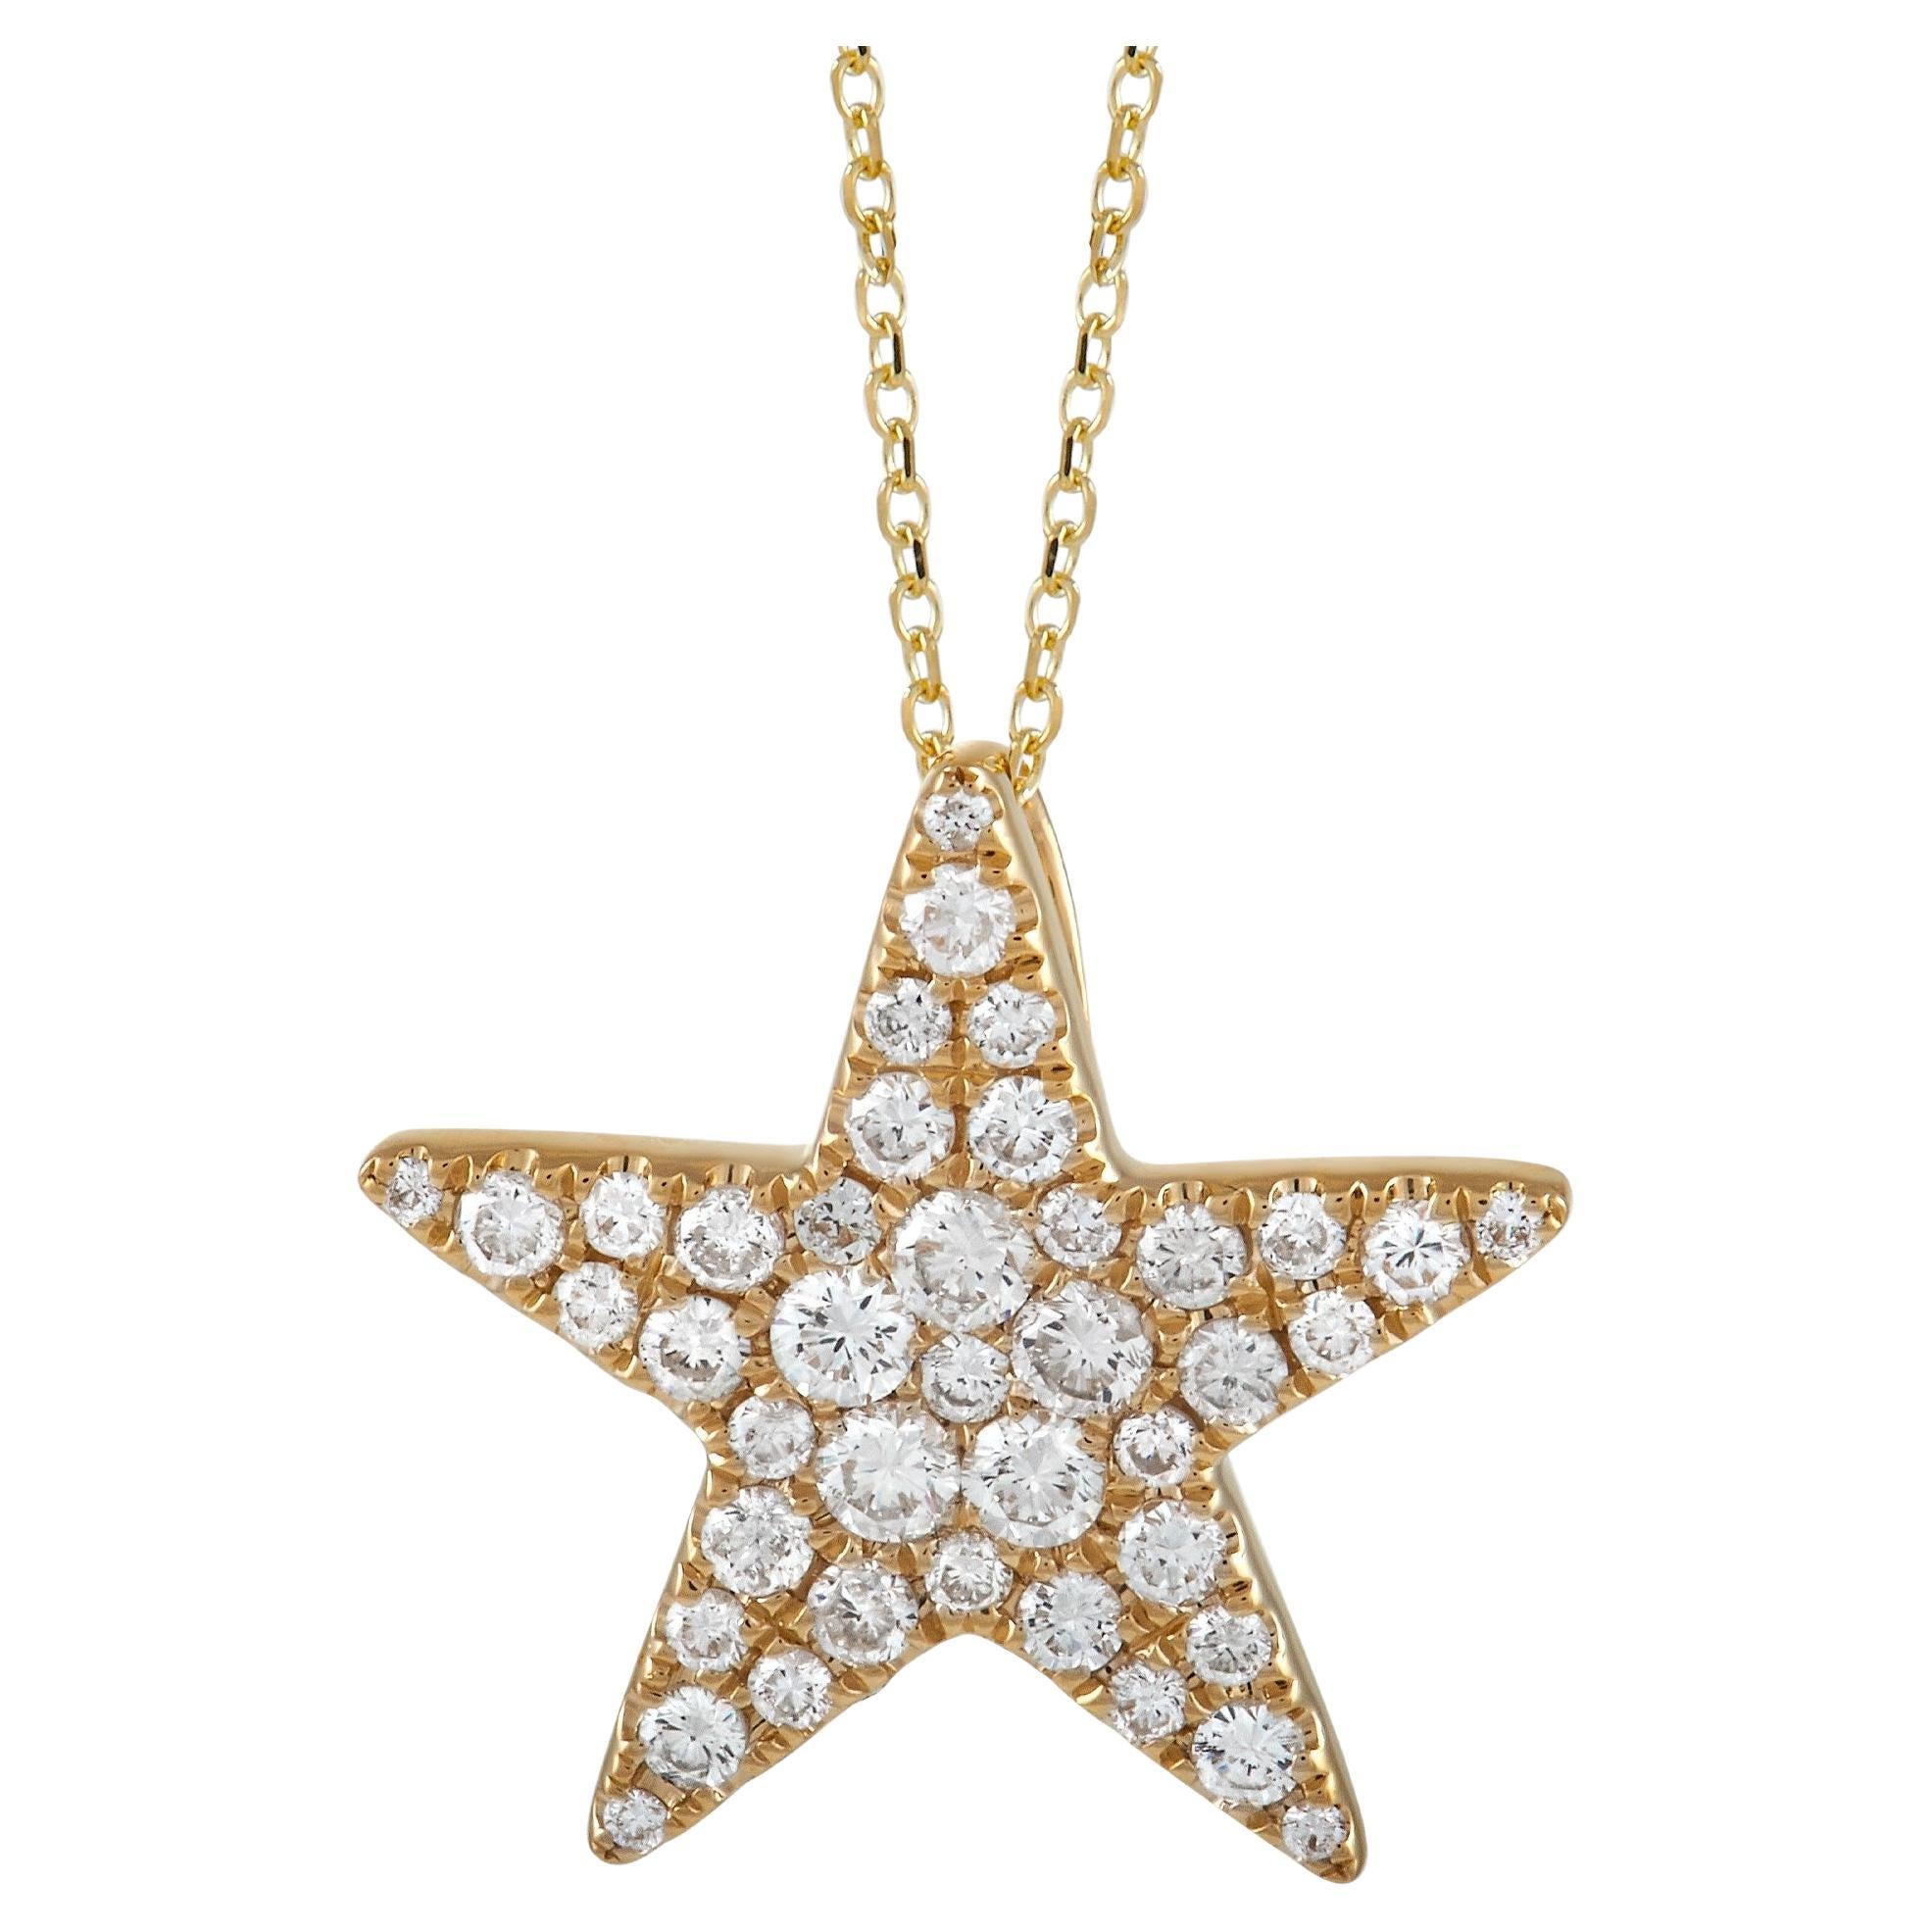 LB Exclusive 18K Yellow Gold 1.00 Ct Diamond Star Necklace